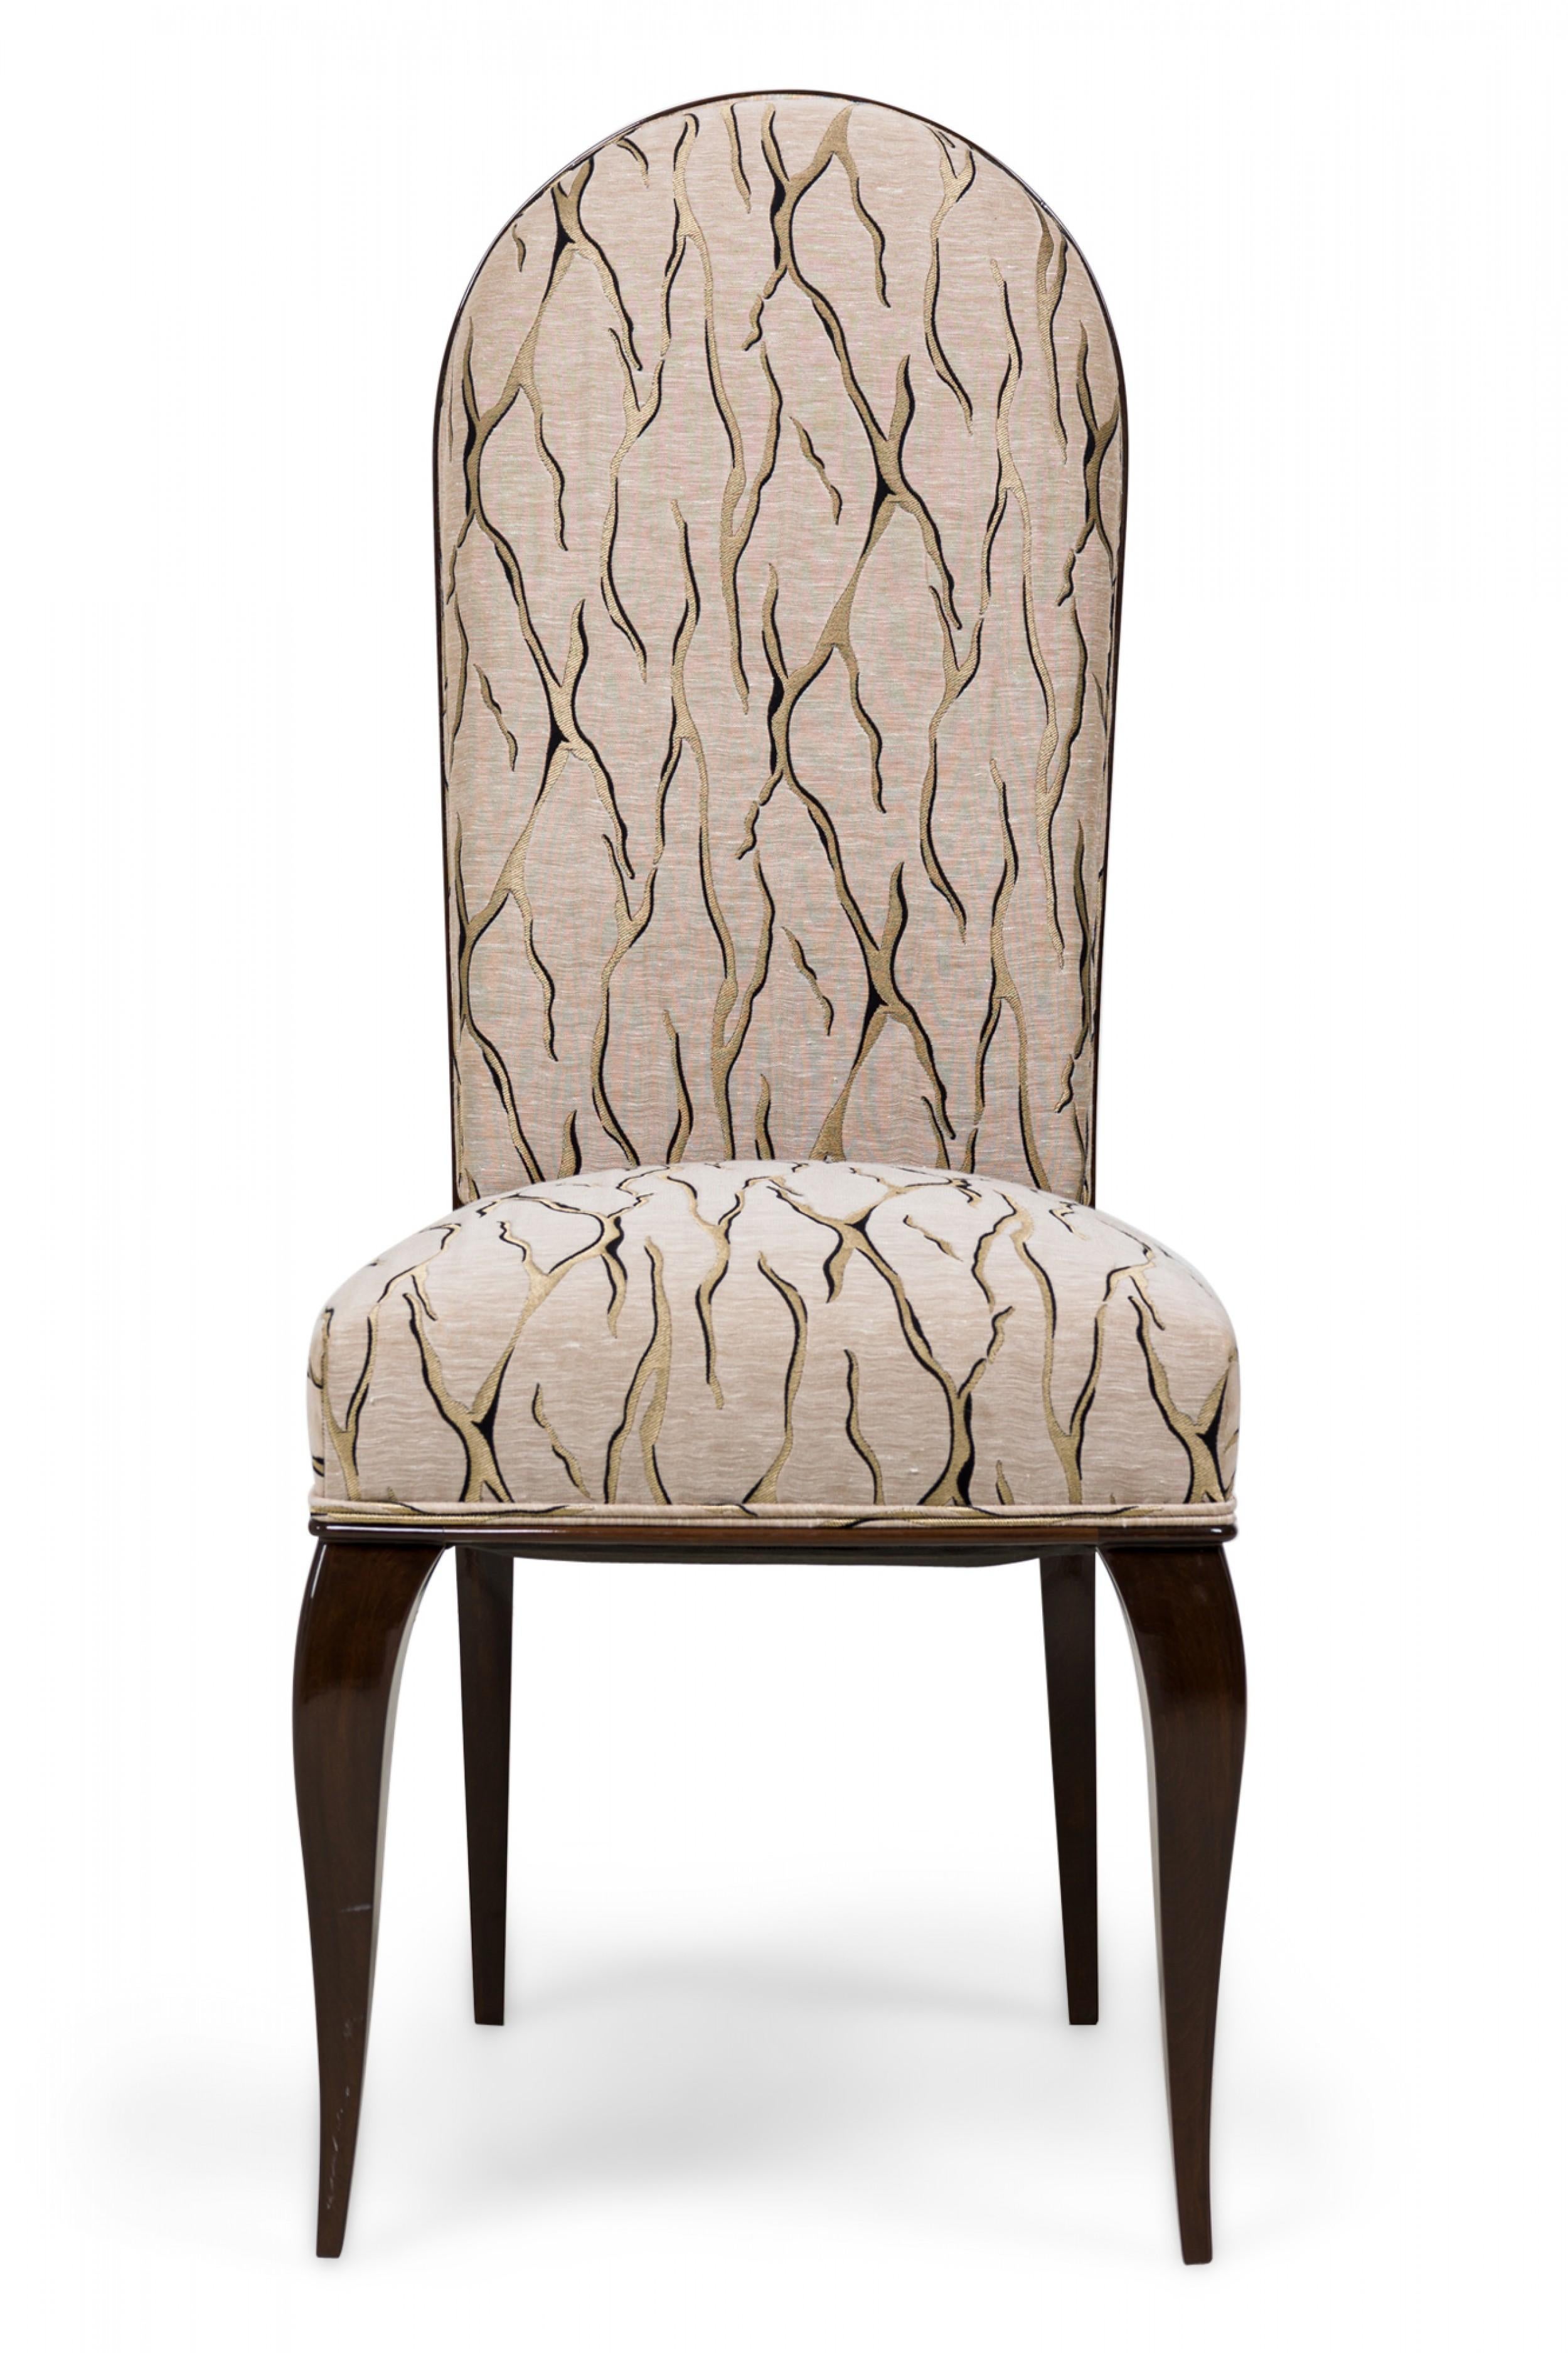 Set of 7 French Art Deco dining / side chairs with mahogany frames, upholstered in a beige patterned fabric with veins of gold, bordered with matching piping, resting on shaped mahogany legs. (Attributed to DOMINIQUE ET CIE)